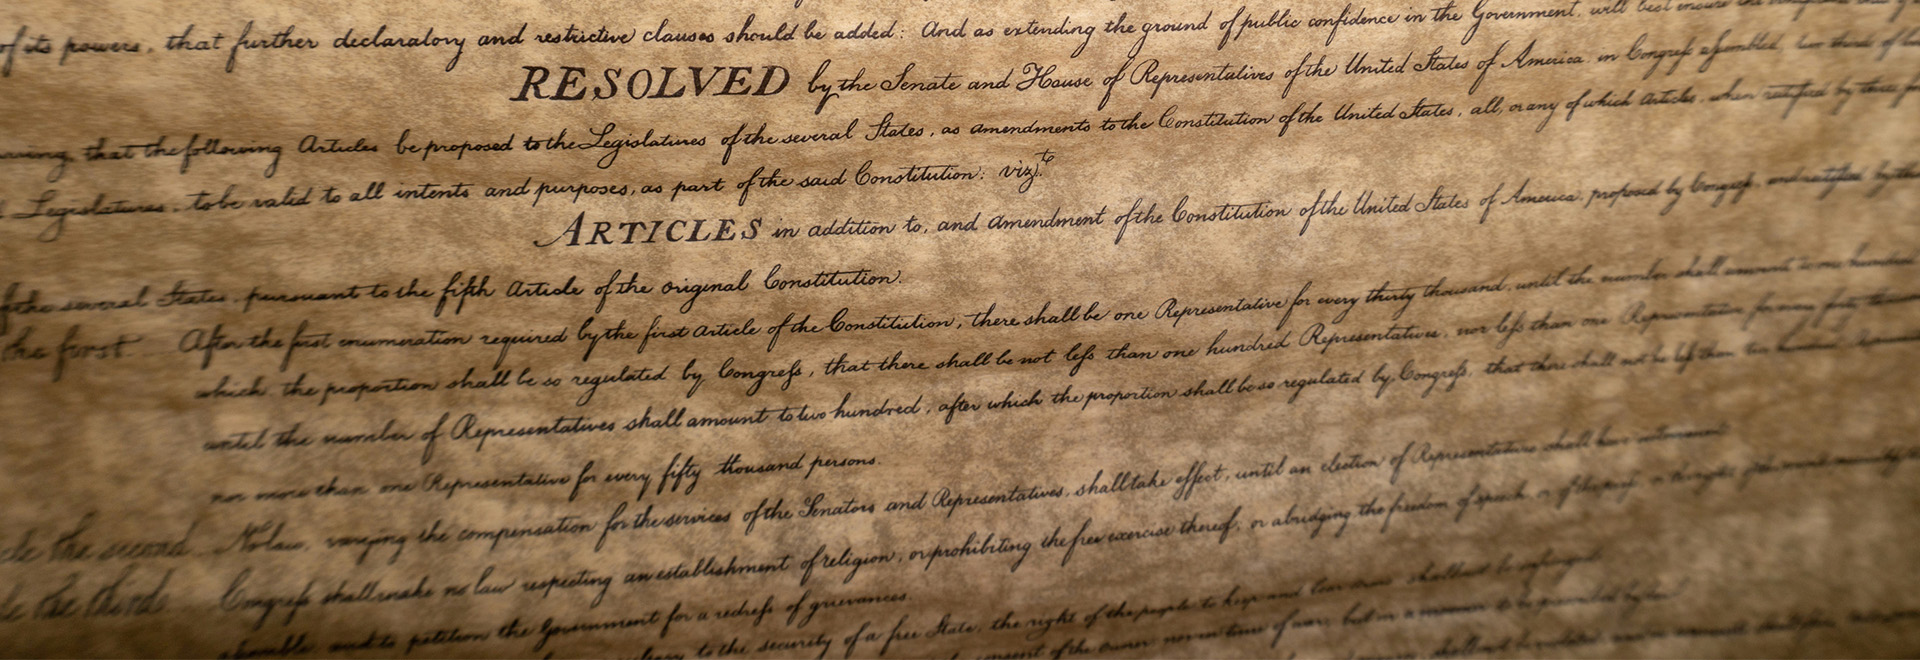 Bill of rights United states vintage document